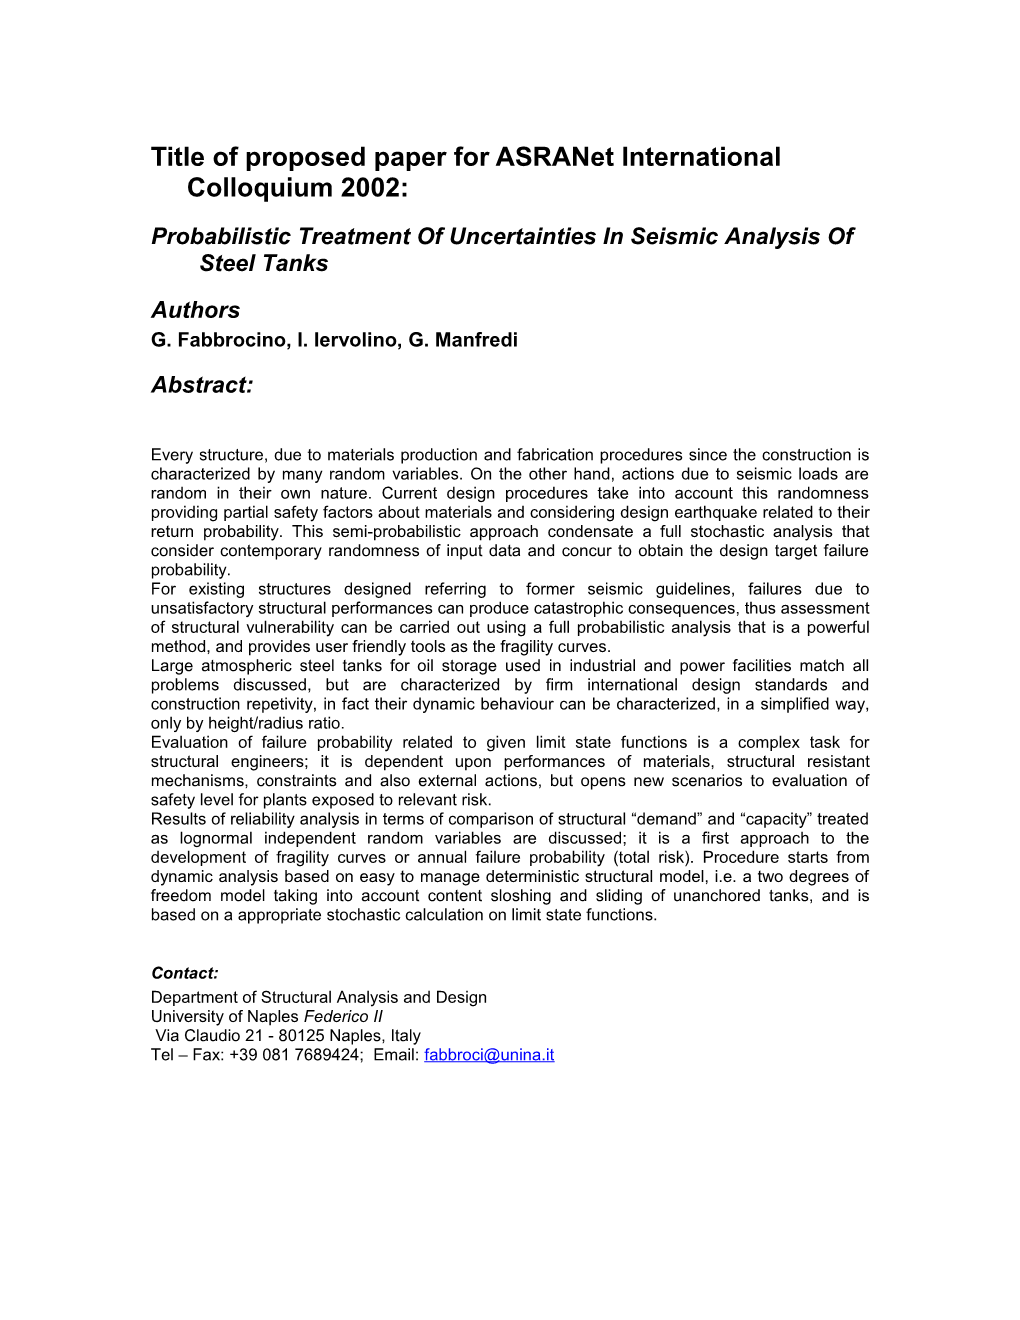 Title of Propsed Paper for Asranet International Colloquium 2002